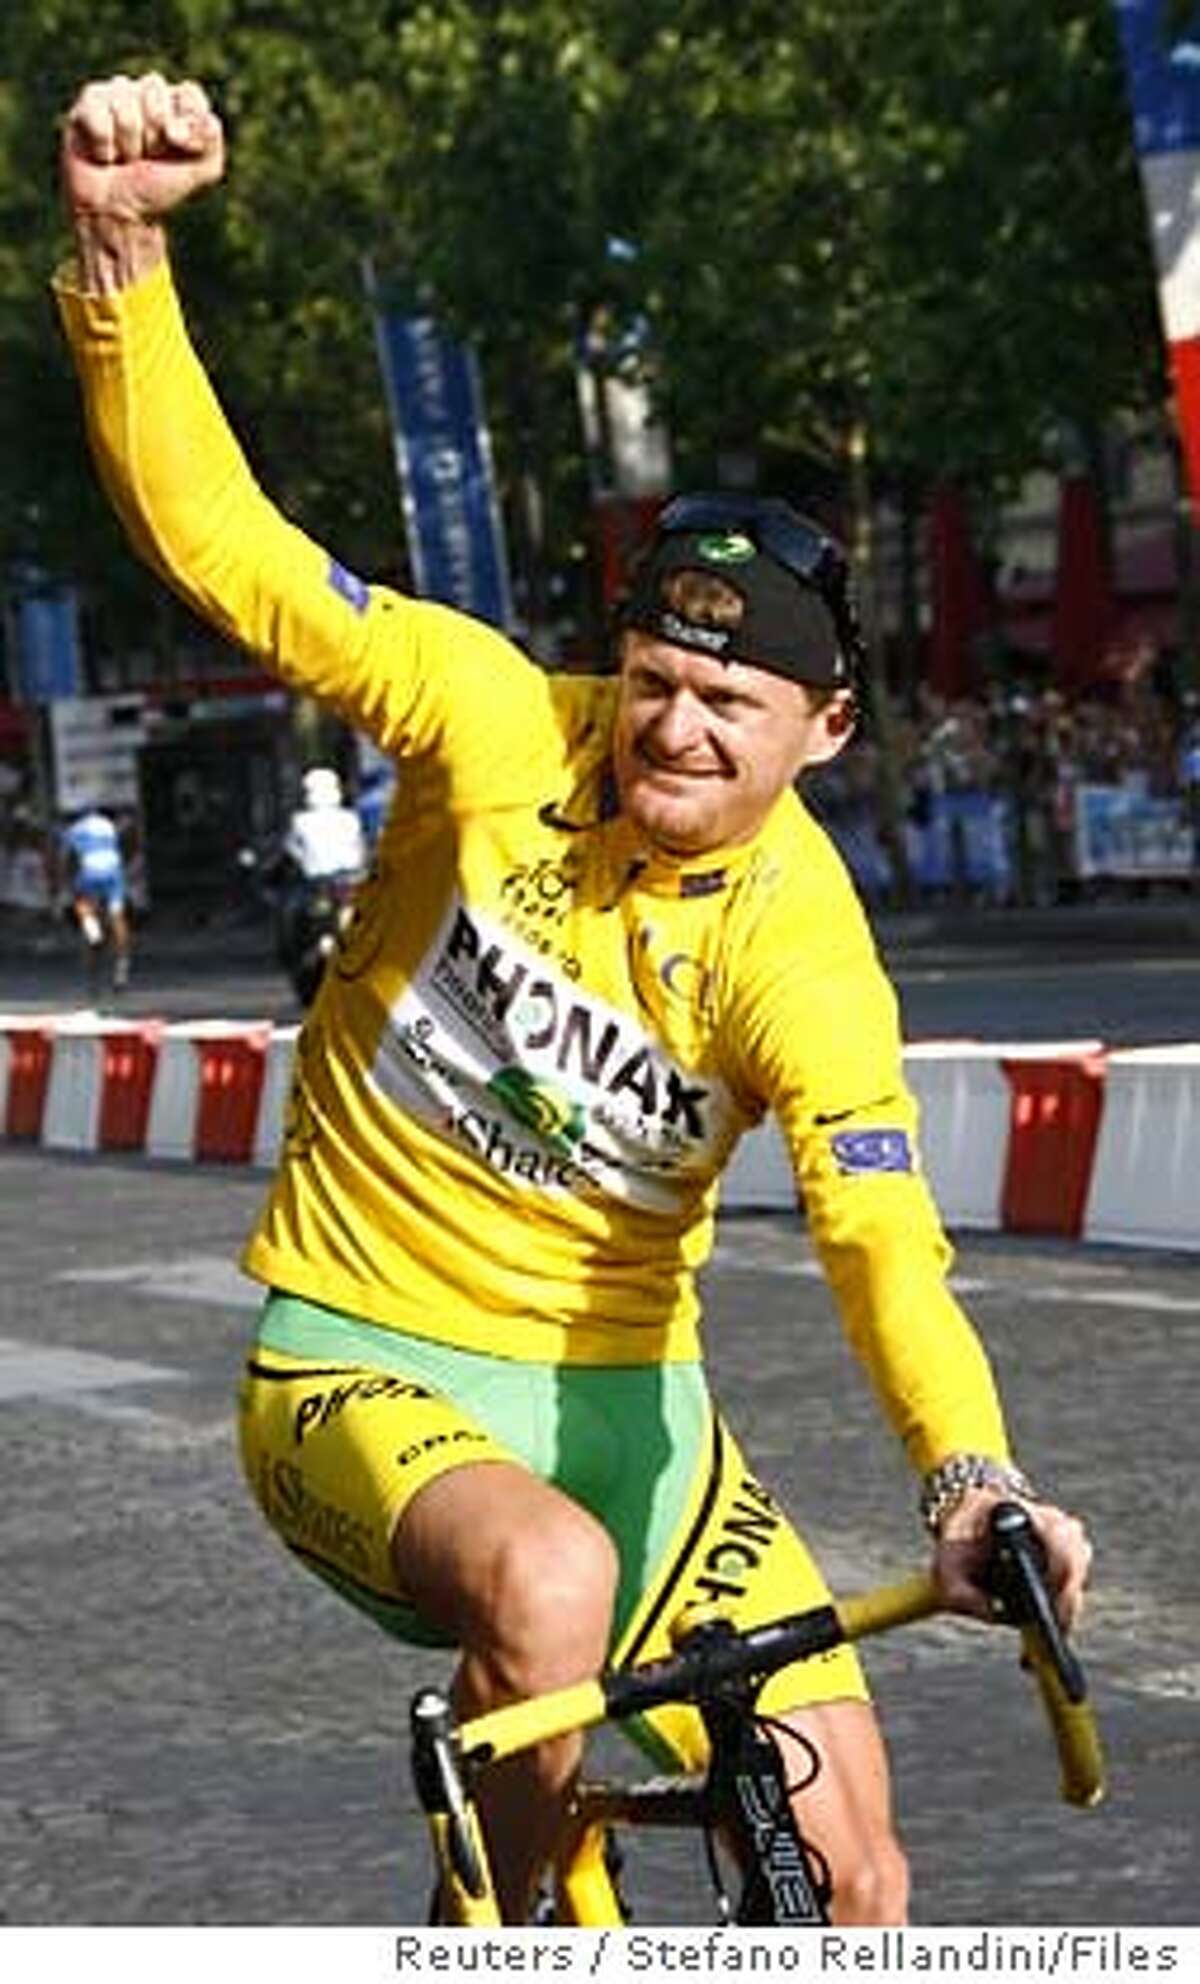 Phonak's team rider Floyd Landis of the U.S., wearing the leader's yellow jersey, celebrates as he takes his lap of honour around the Champs Elysees after winning the 93rd Tour de France cycling race in Paris in this July 23, 2006 file photo. Landis is likely to lose his Tour de France title after a second drugs sample on Saturday confirmed a positive test for excessive amounts of the male sex hormone testosterone. REUTERS/Stefano Rellandini/Files (FRANCE) Ran on: 08-13-2006 Floyd Landis, the U.S. rider on the Phonak team shown taking his lap of honor in Paris last month after winning the Tour de France, has failed two drug tests.